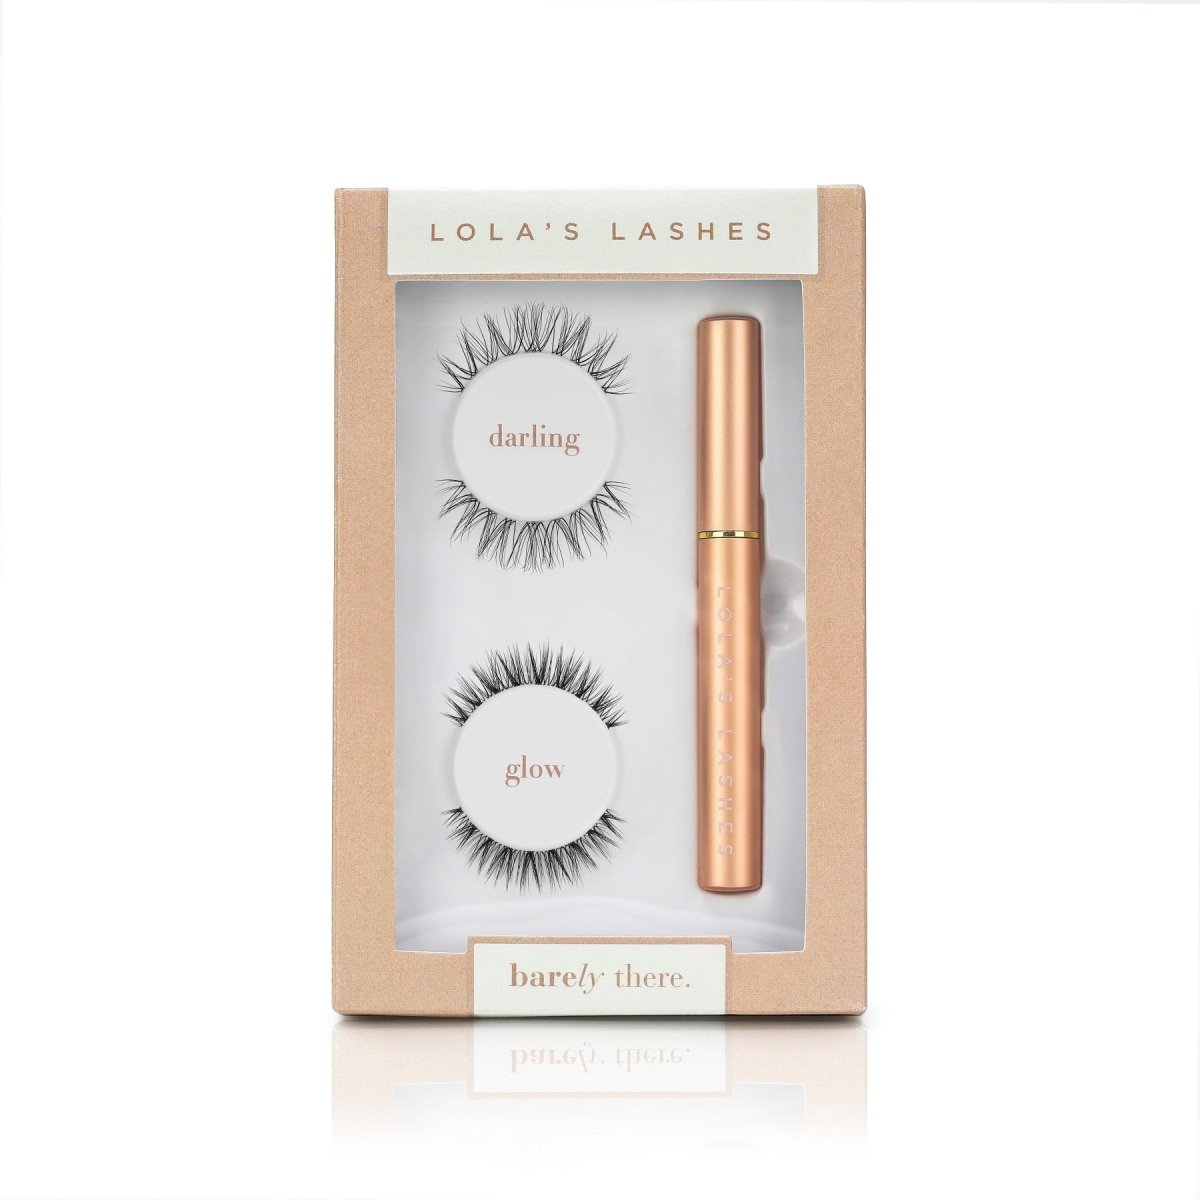 Barely There Duo Set - Darling & Glow - Lola's Lashes